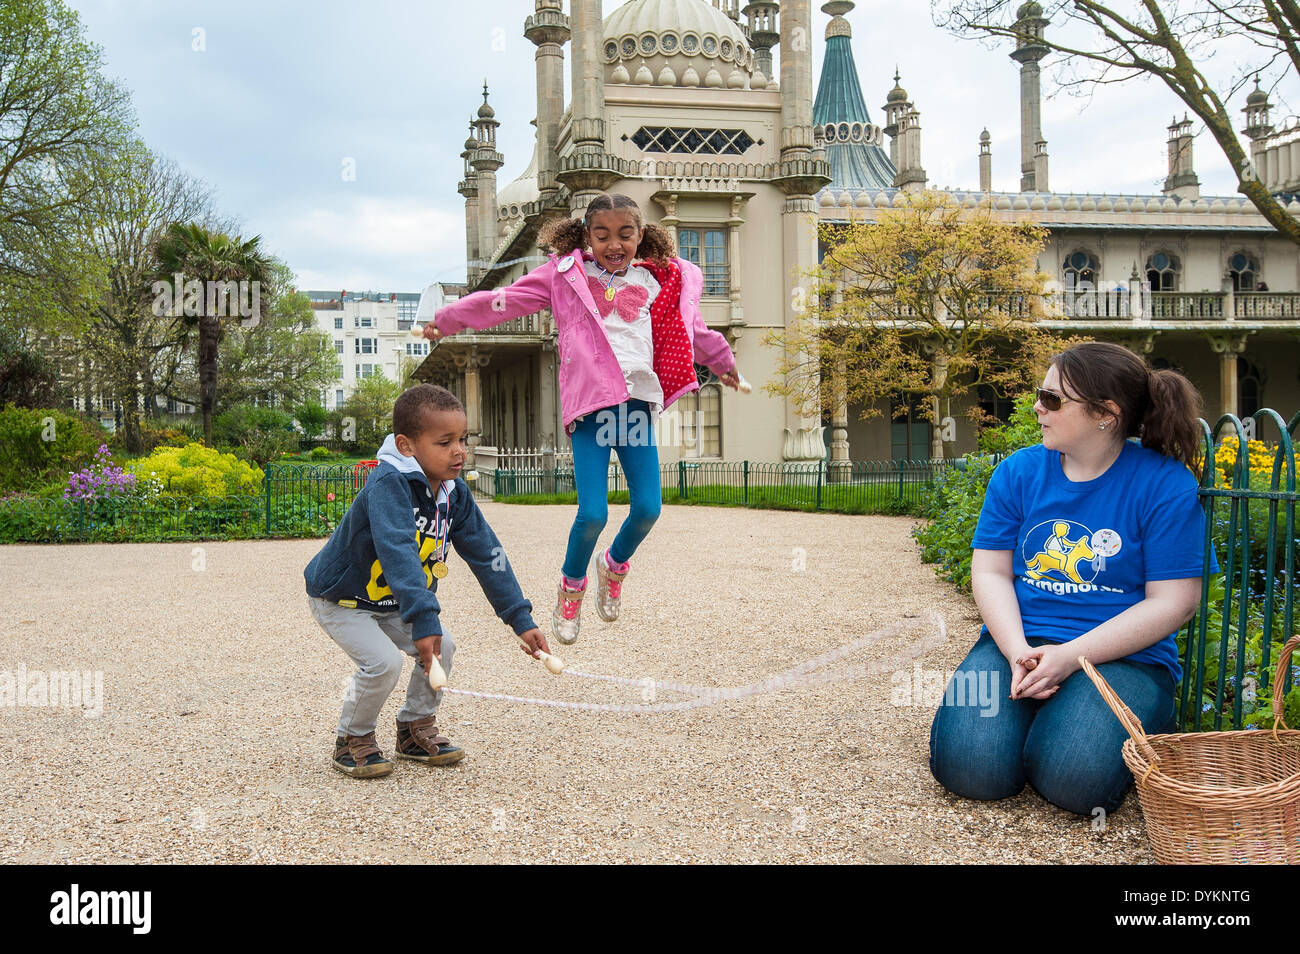 Brighton, UK. 21st Apr, 2014. John and Brechen Harman-Farquharson skipping at the Easter egg games as Brighton & Hove Food and Drink Festival hold an Easter Egg hunt in aid of the children's charity Rockinghorse in Pavilion Gardens, Brighton. Children complete games to find Easter eggs around the Brighton Pavilion gardens: egg and spoon race, skipping, quoits and card games before making a badge and receiving a medal for their efforts. The event is sponsored by PHS Group PLC and raises over £400 for the Rockinghorse charity.  Credit:  Julia Claxton/Alamy Live News Stock Photo